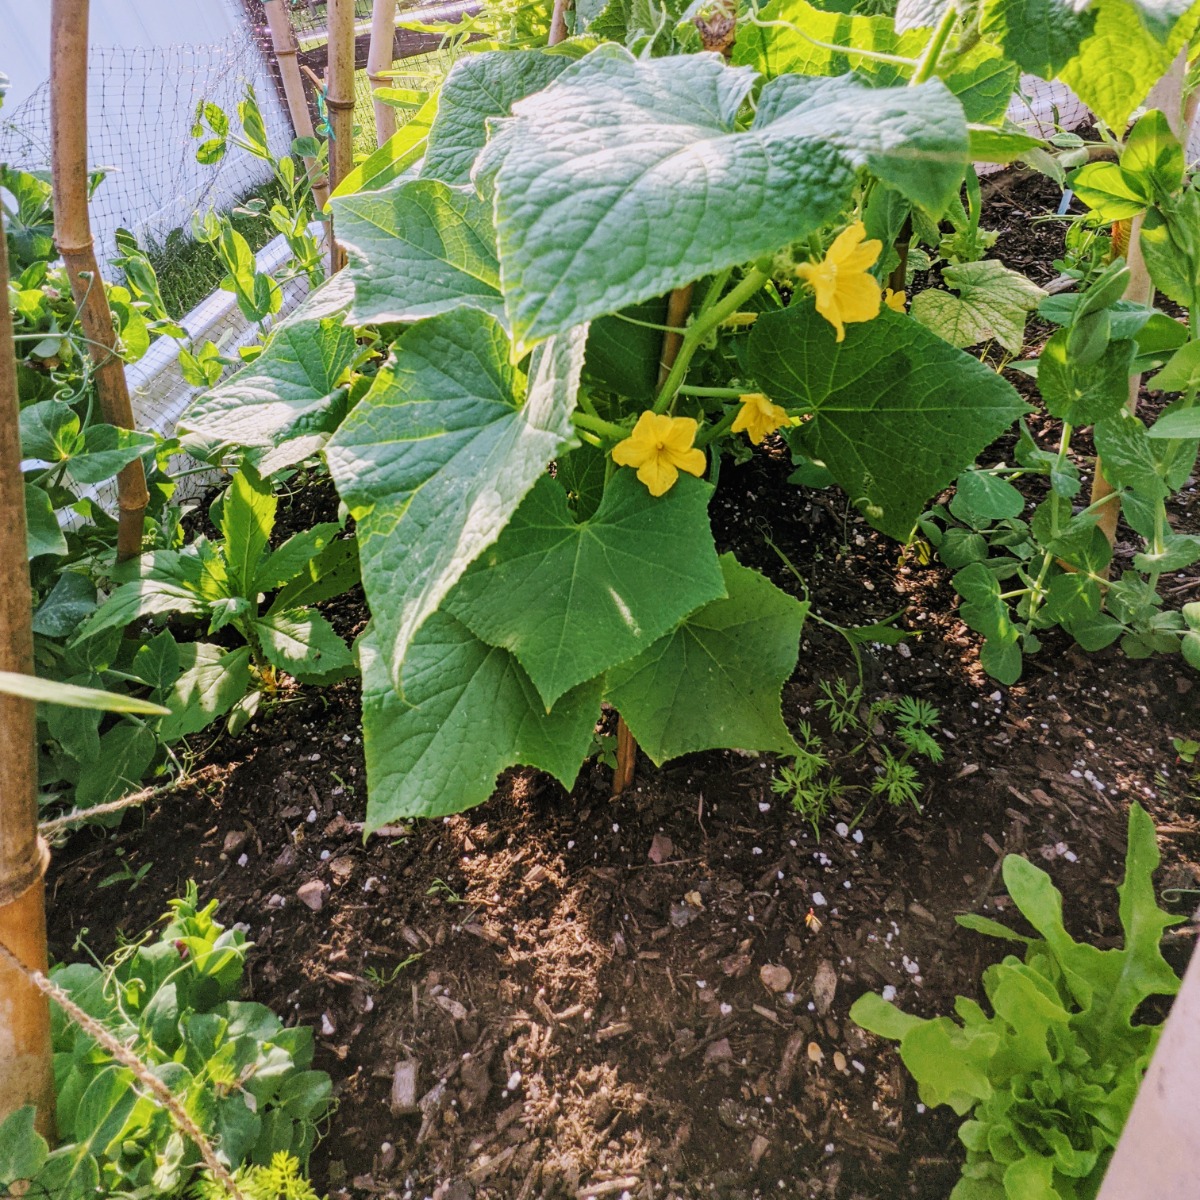 Companion Plants for Lettuce - cucumbers, snow peas, carrots, and corn